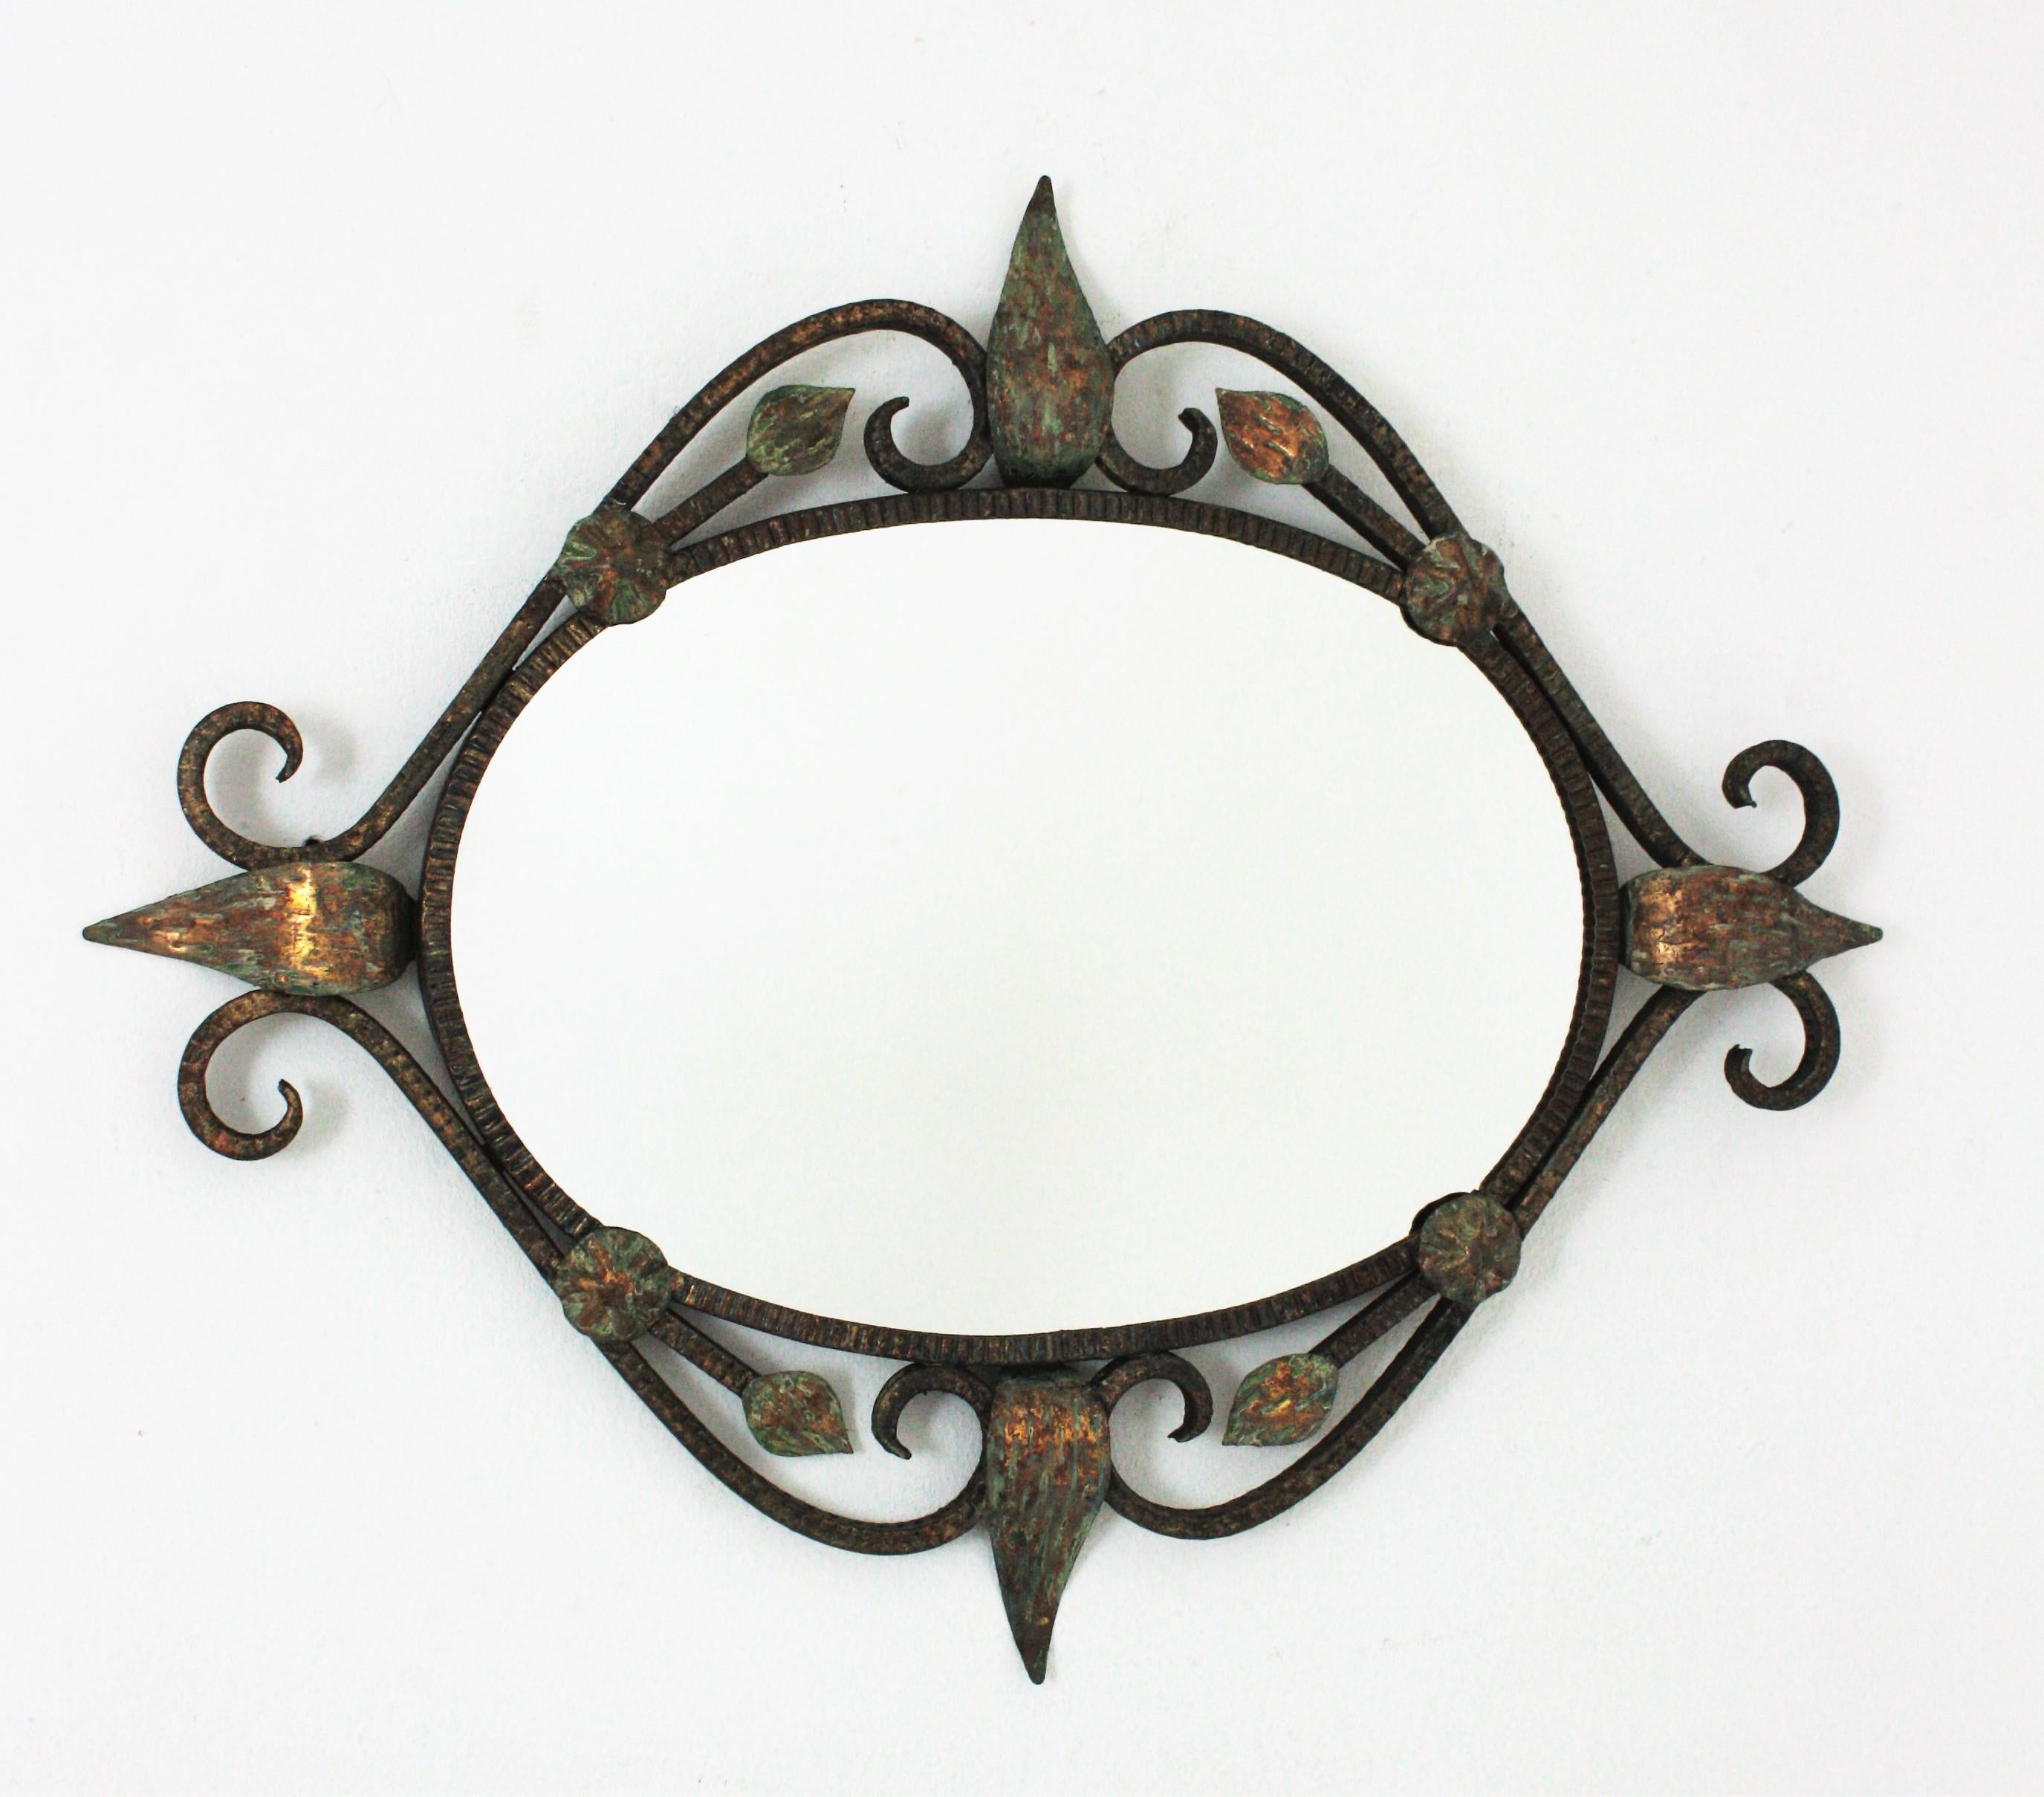 Parcel Gilt wrought iron oval mirror with scroll and leaves details, France, 1940s.
Beautiful design and terrific aged patina showing rests of the orgininal gold leaf gilding with green accents.
Measures: 74 cm H x 60 cm W x 5 cm D 
Glass measures: